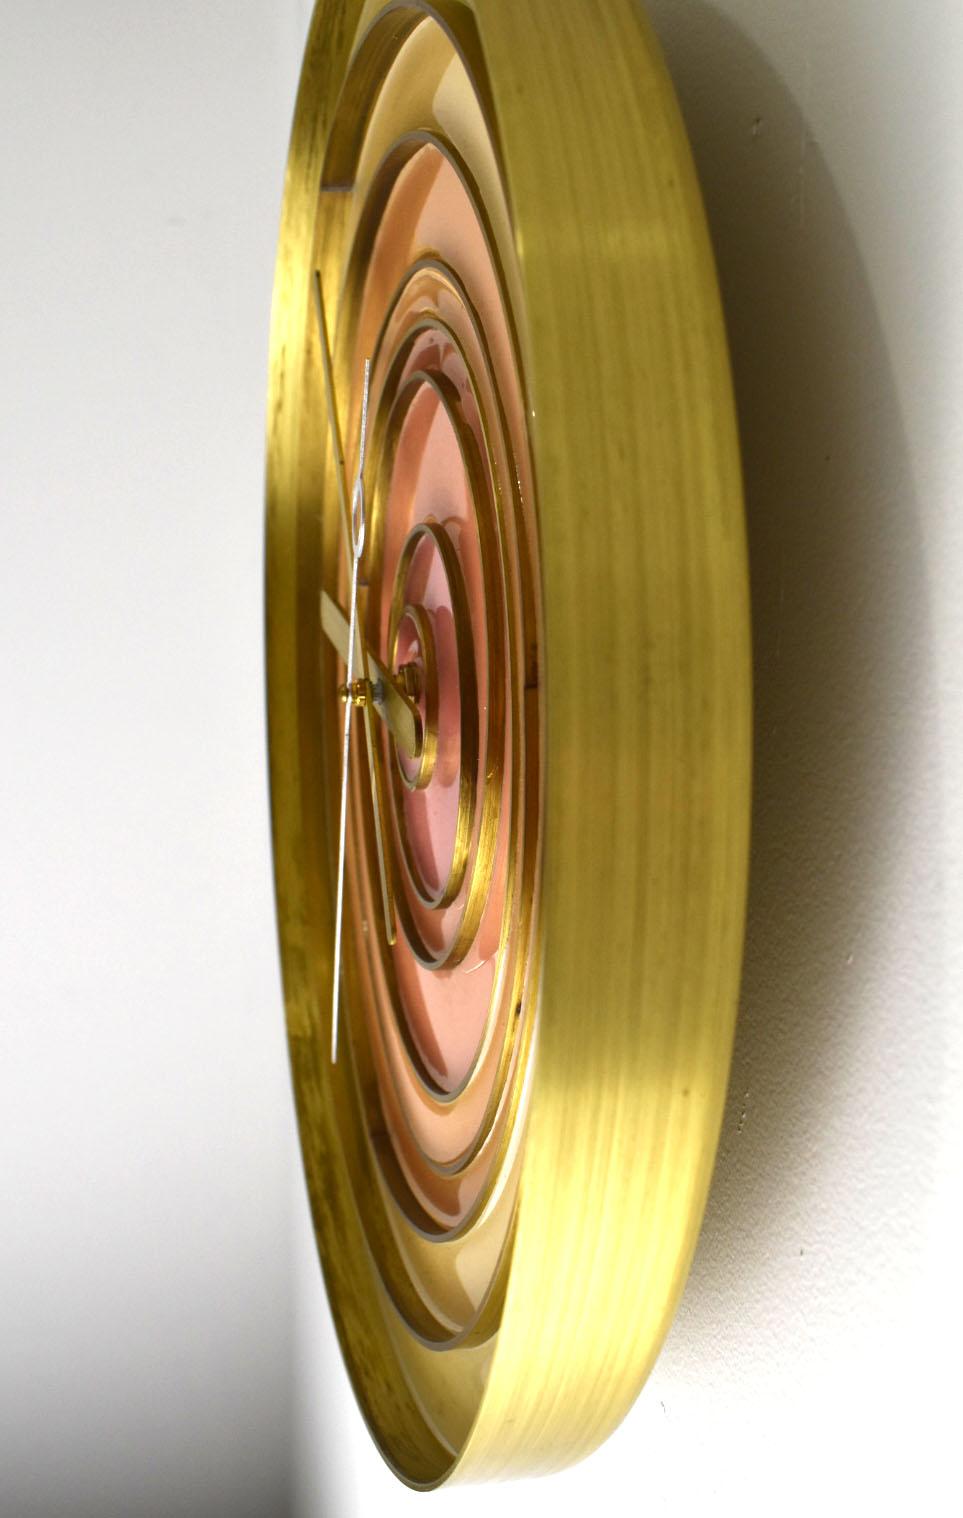 This stunning clock is made of a single spun piece of solid brass.  It is  designed with inlaid varying sized brass rings and then filled with tinted epoxy poured.   The hour and minute hands are hand cut, a continuous sweep hand mechanism has been